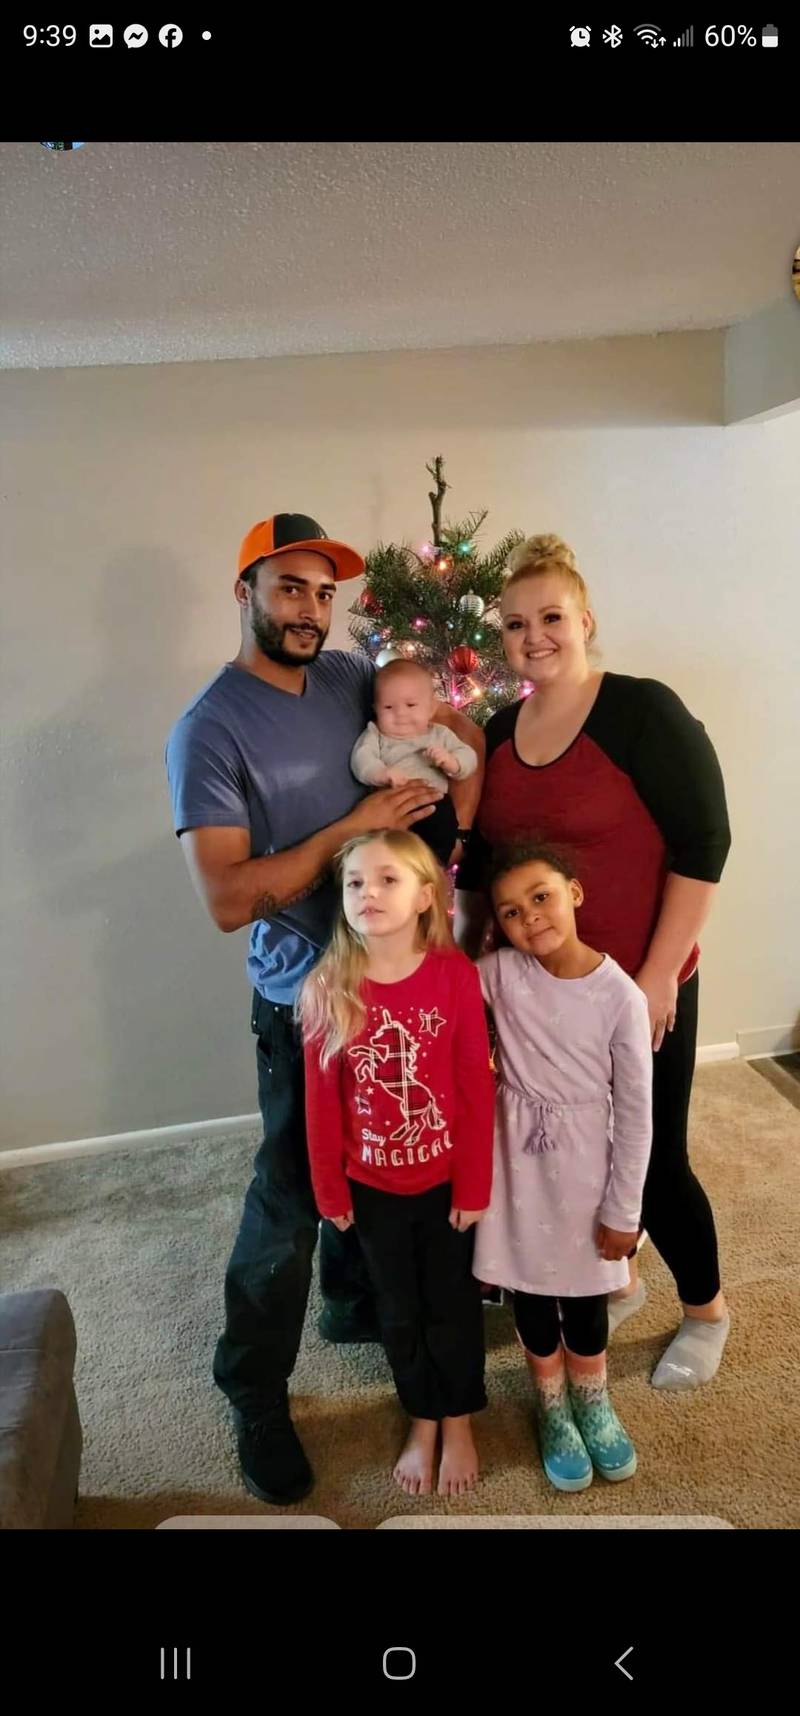 Sam Denney and her family at Christmas.